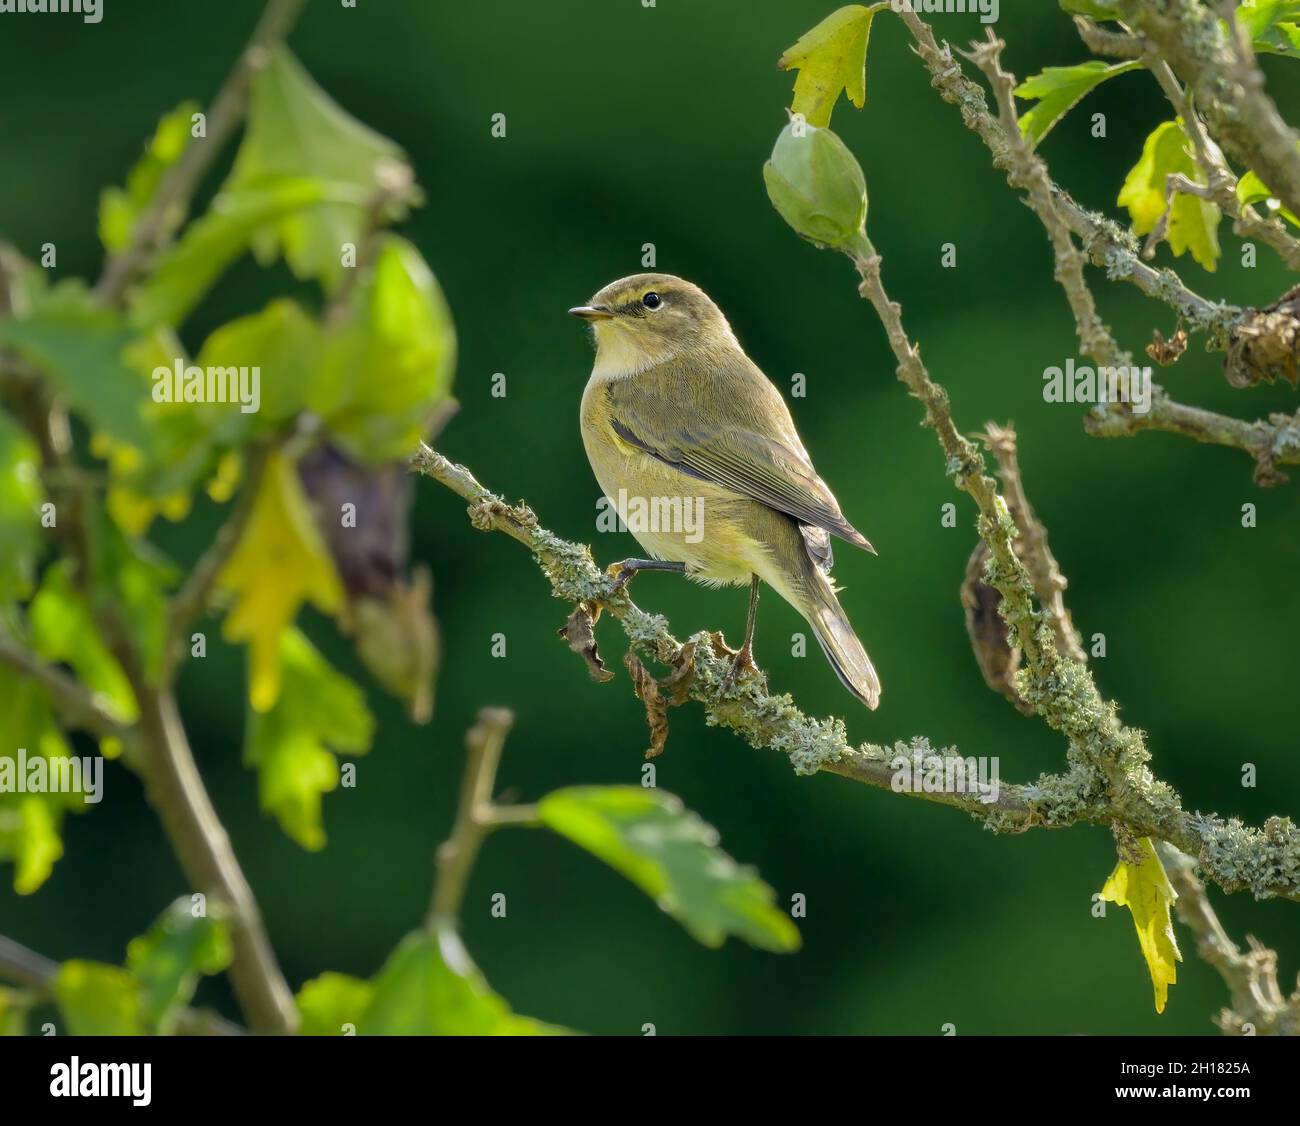 A common chiffchaff, Phylloscopus collybita, is sitting on a branchlet, Germany Stock Photo